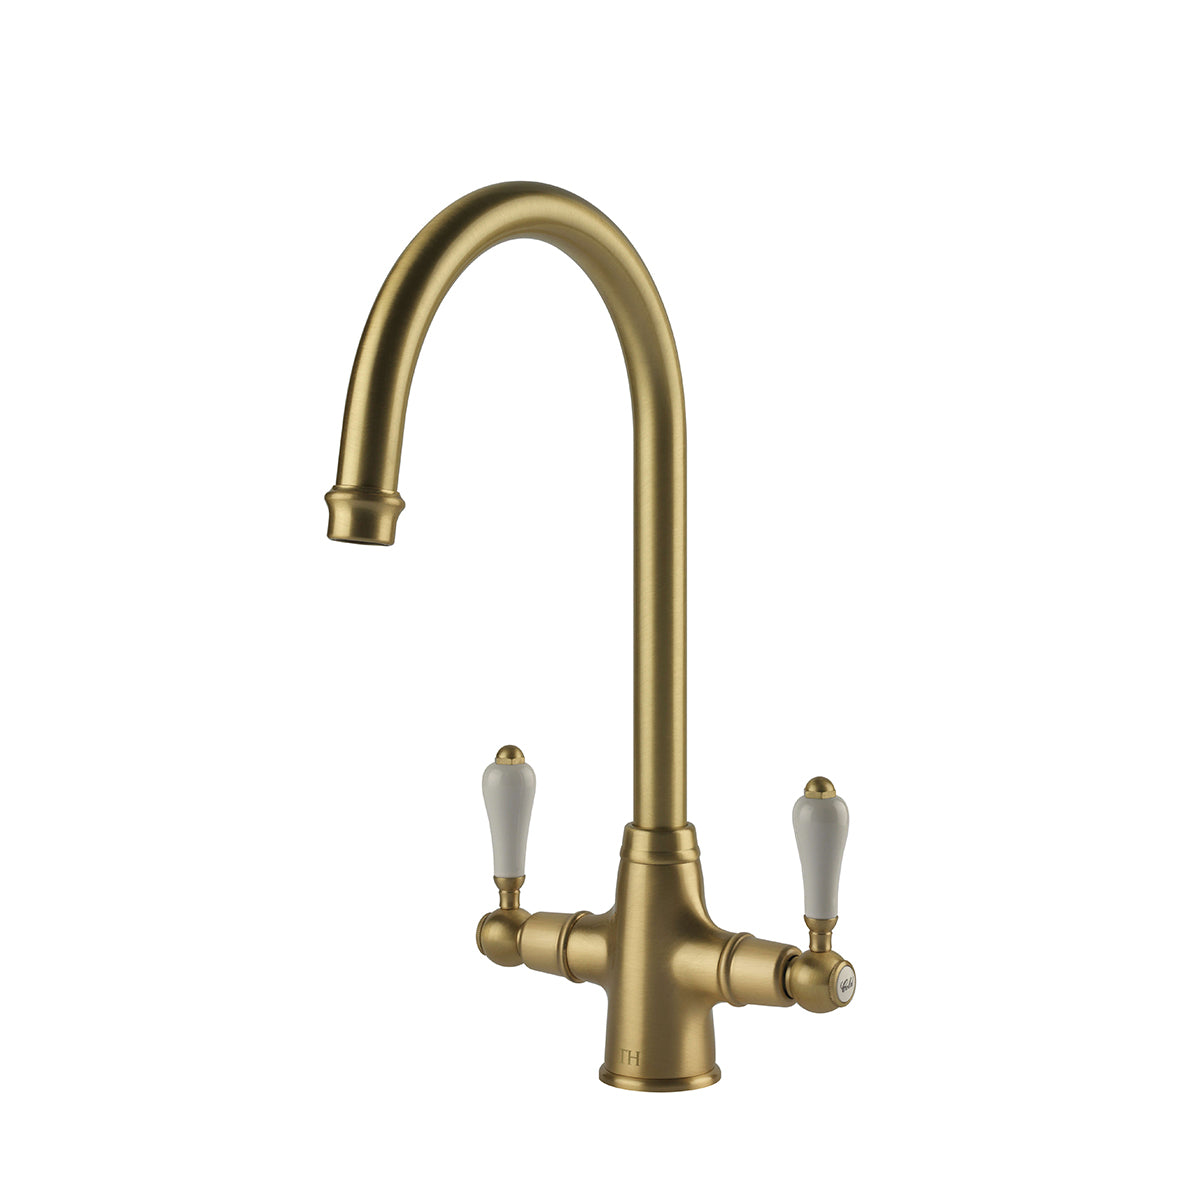 TURNER HASTINGS LUDLOW DOUBLE SINK MIXER TAP 355MM BRUSHED BRASS (CERAMIC HANDLE)